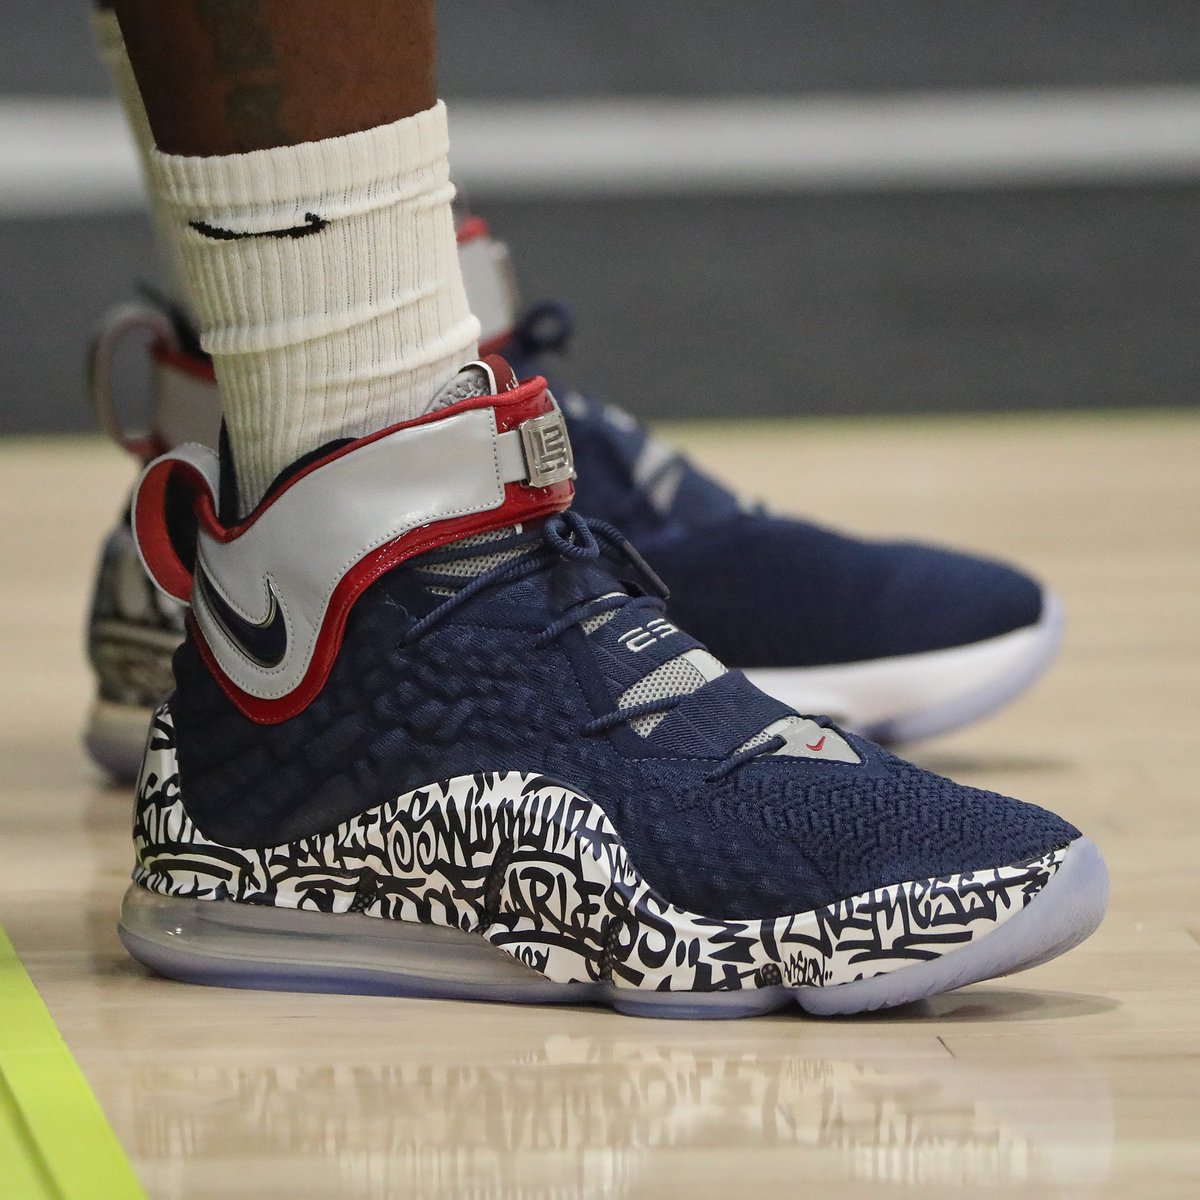 KingJames laced up in Nike LeBron 